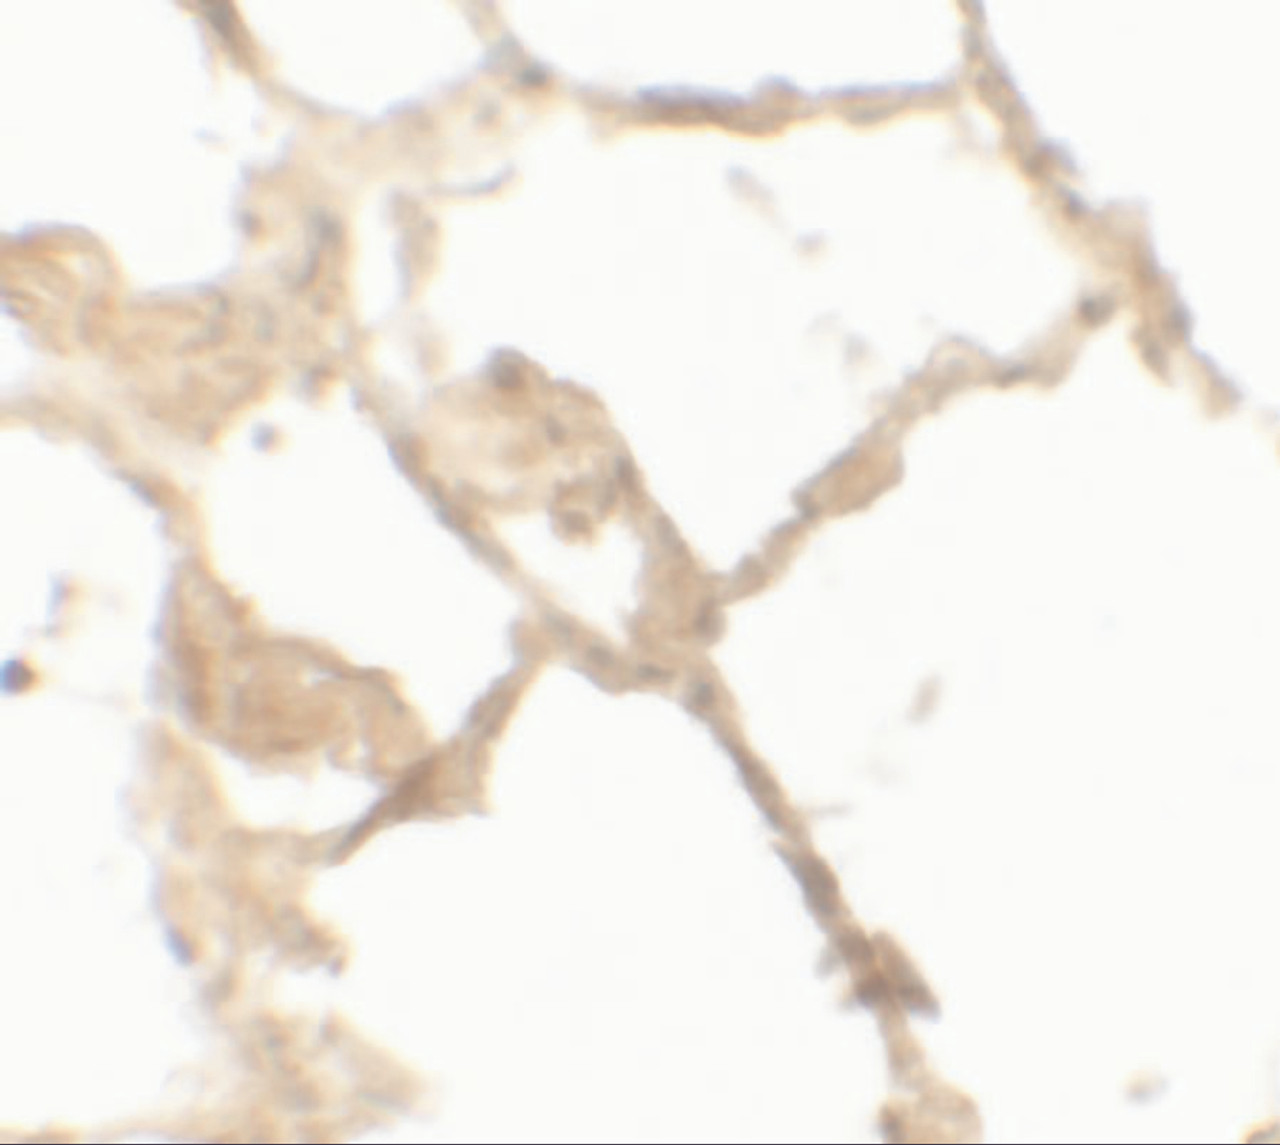 Immunohistochemistry of TFEB in human lung tissue with TFEB antibody at 2.5 &#956;g/mL.